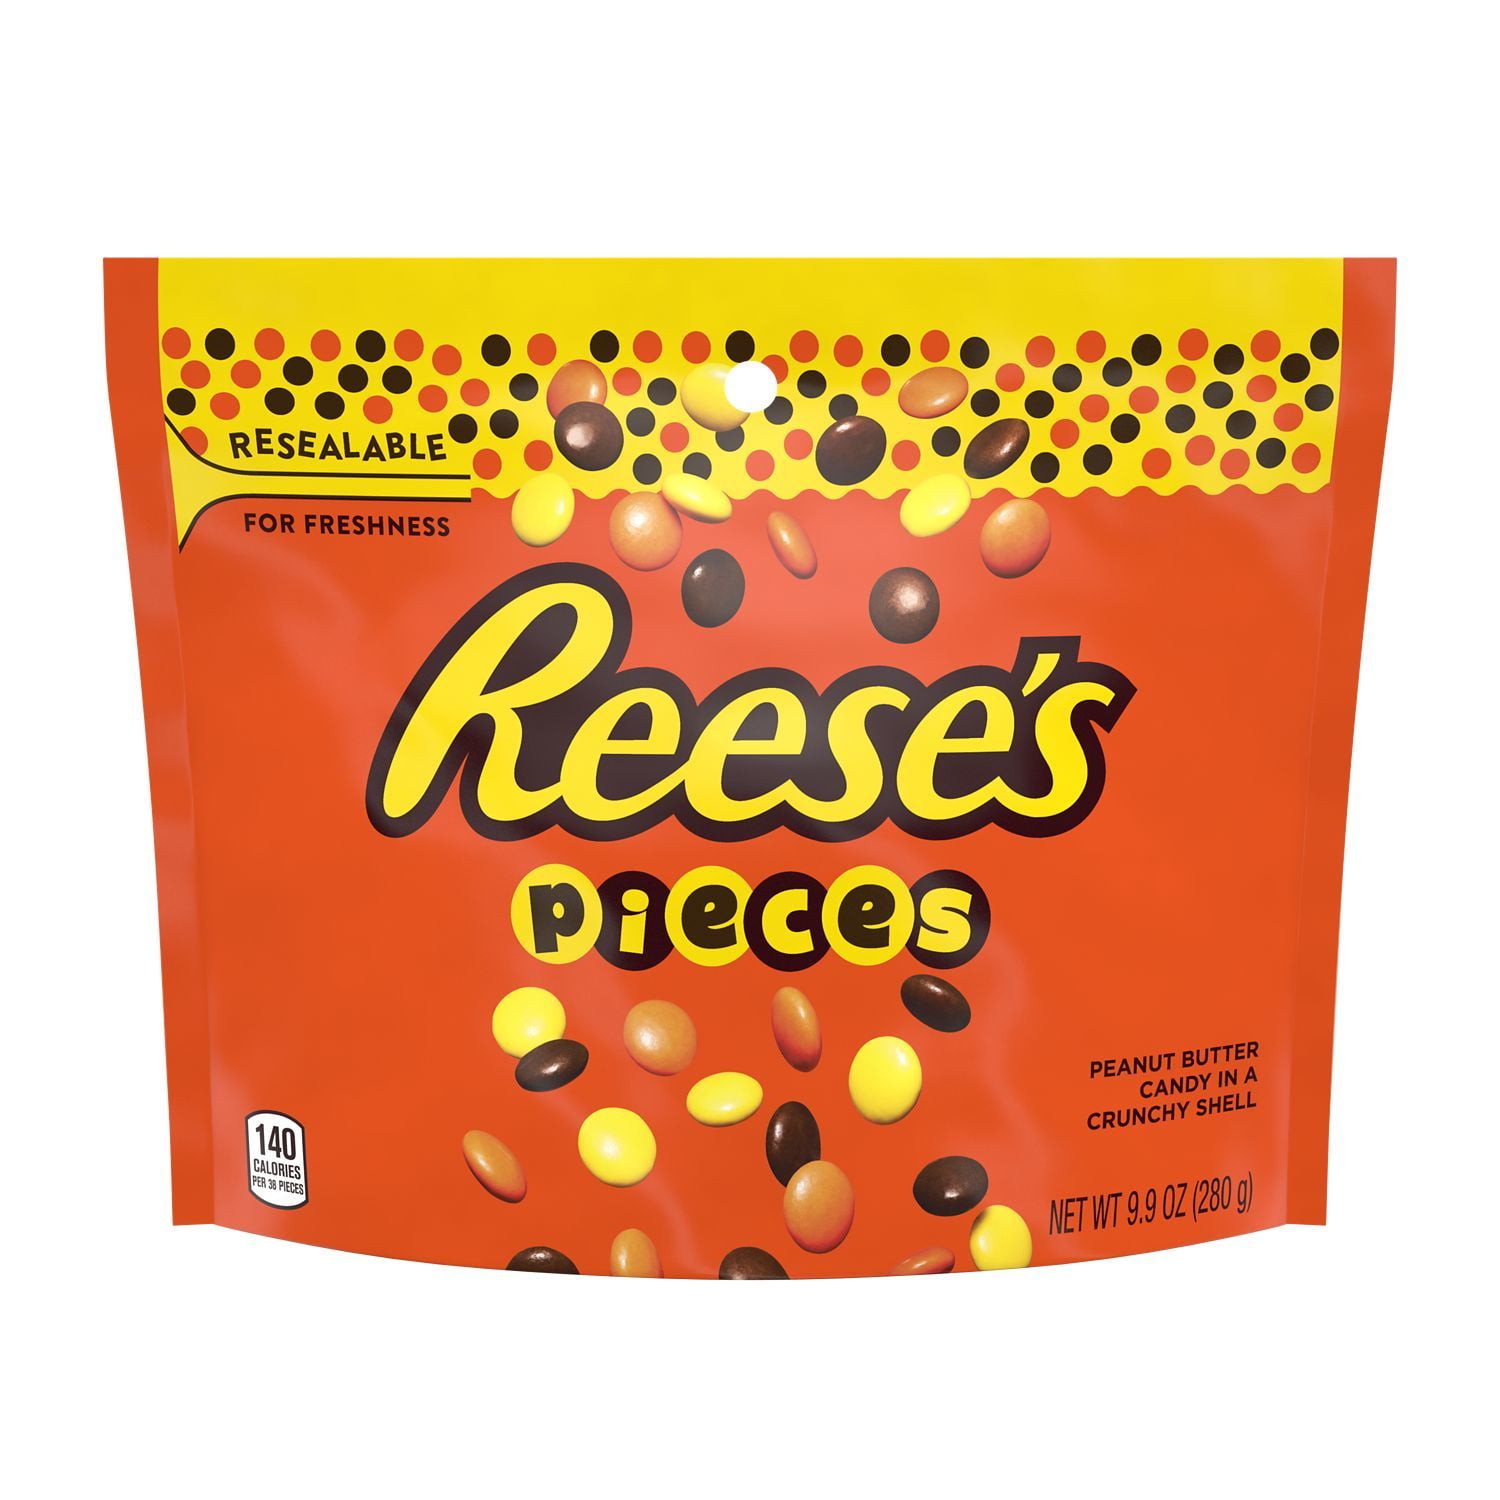 REESE'S, PIECES Peanut Butter in a Crunchy Shell ...